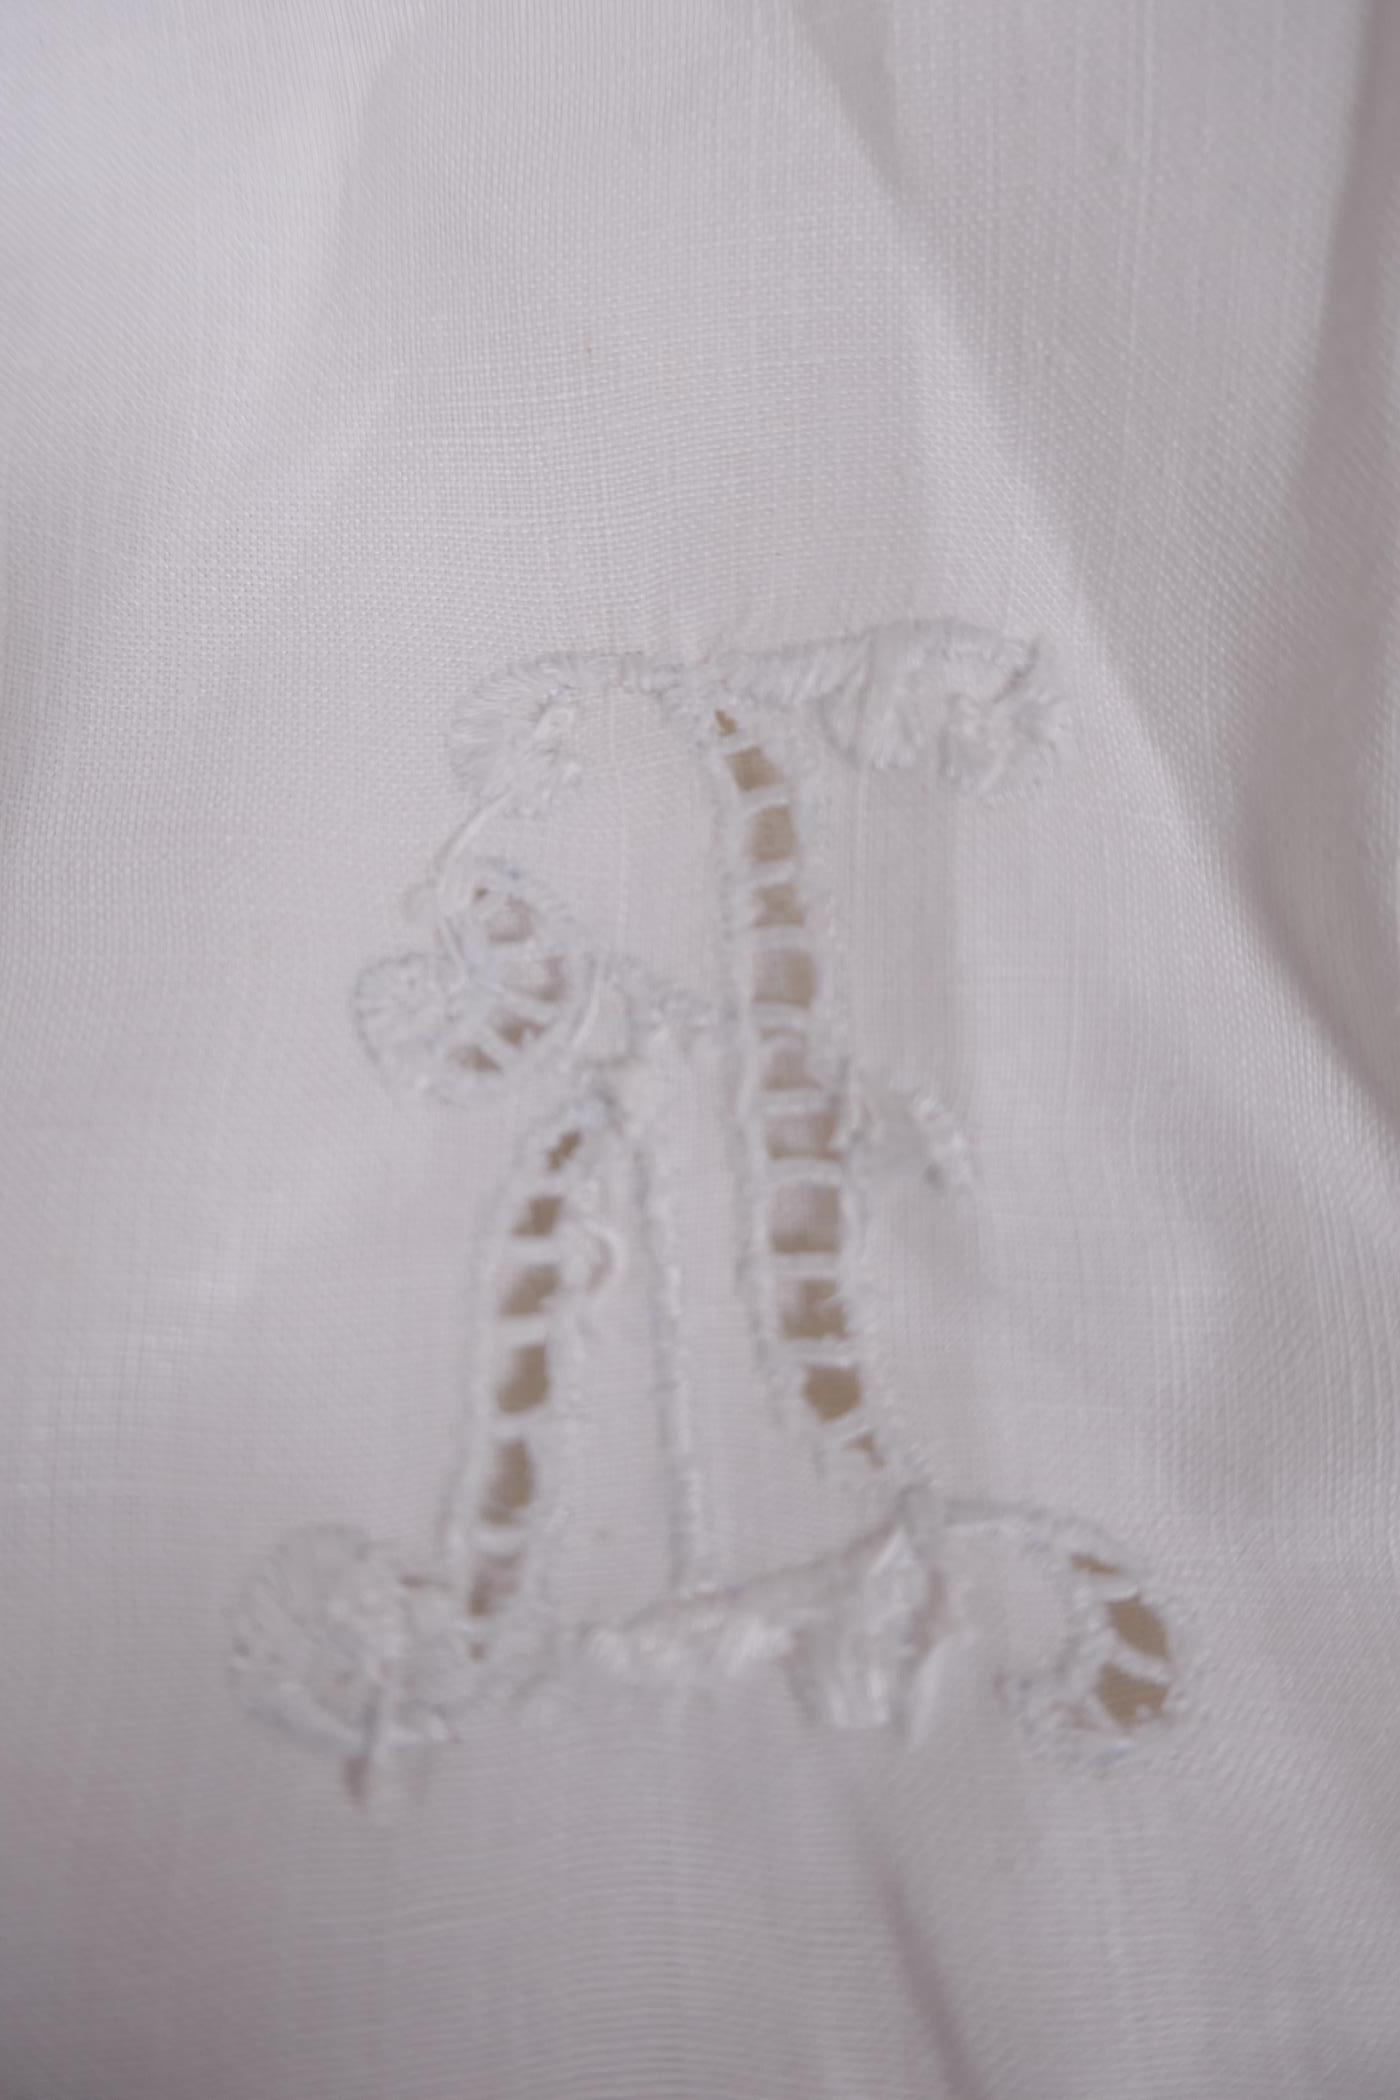 A collection of embroidered and printed linen and other fabric place mats - Image 3 of 4